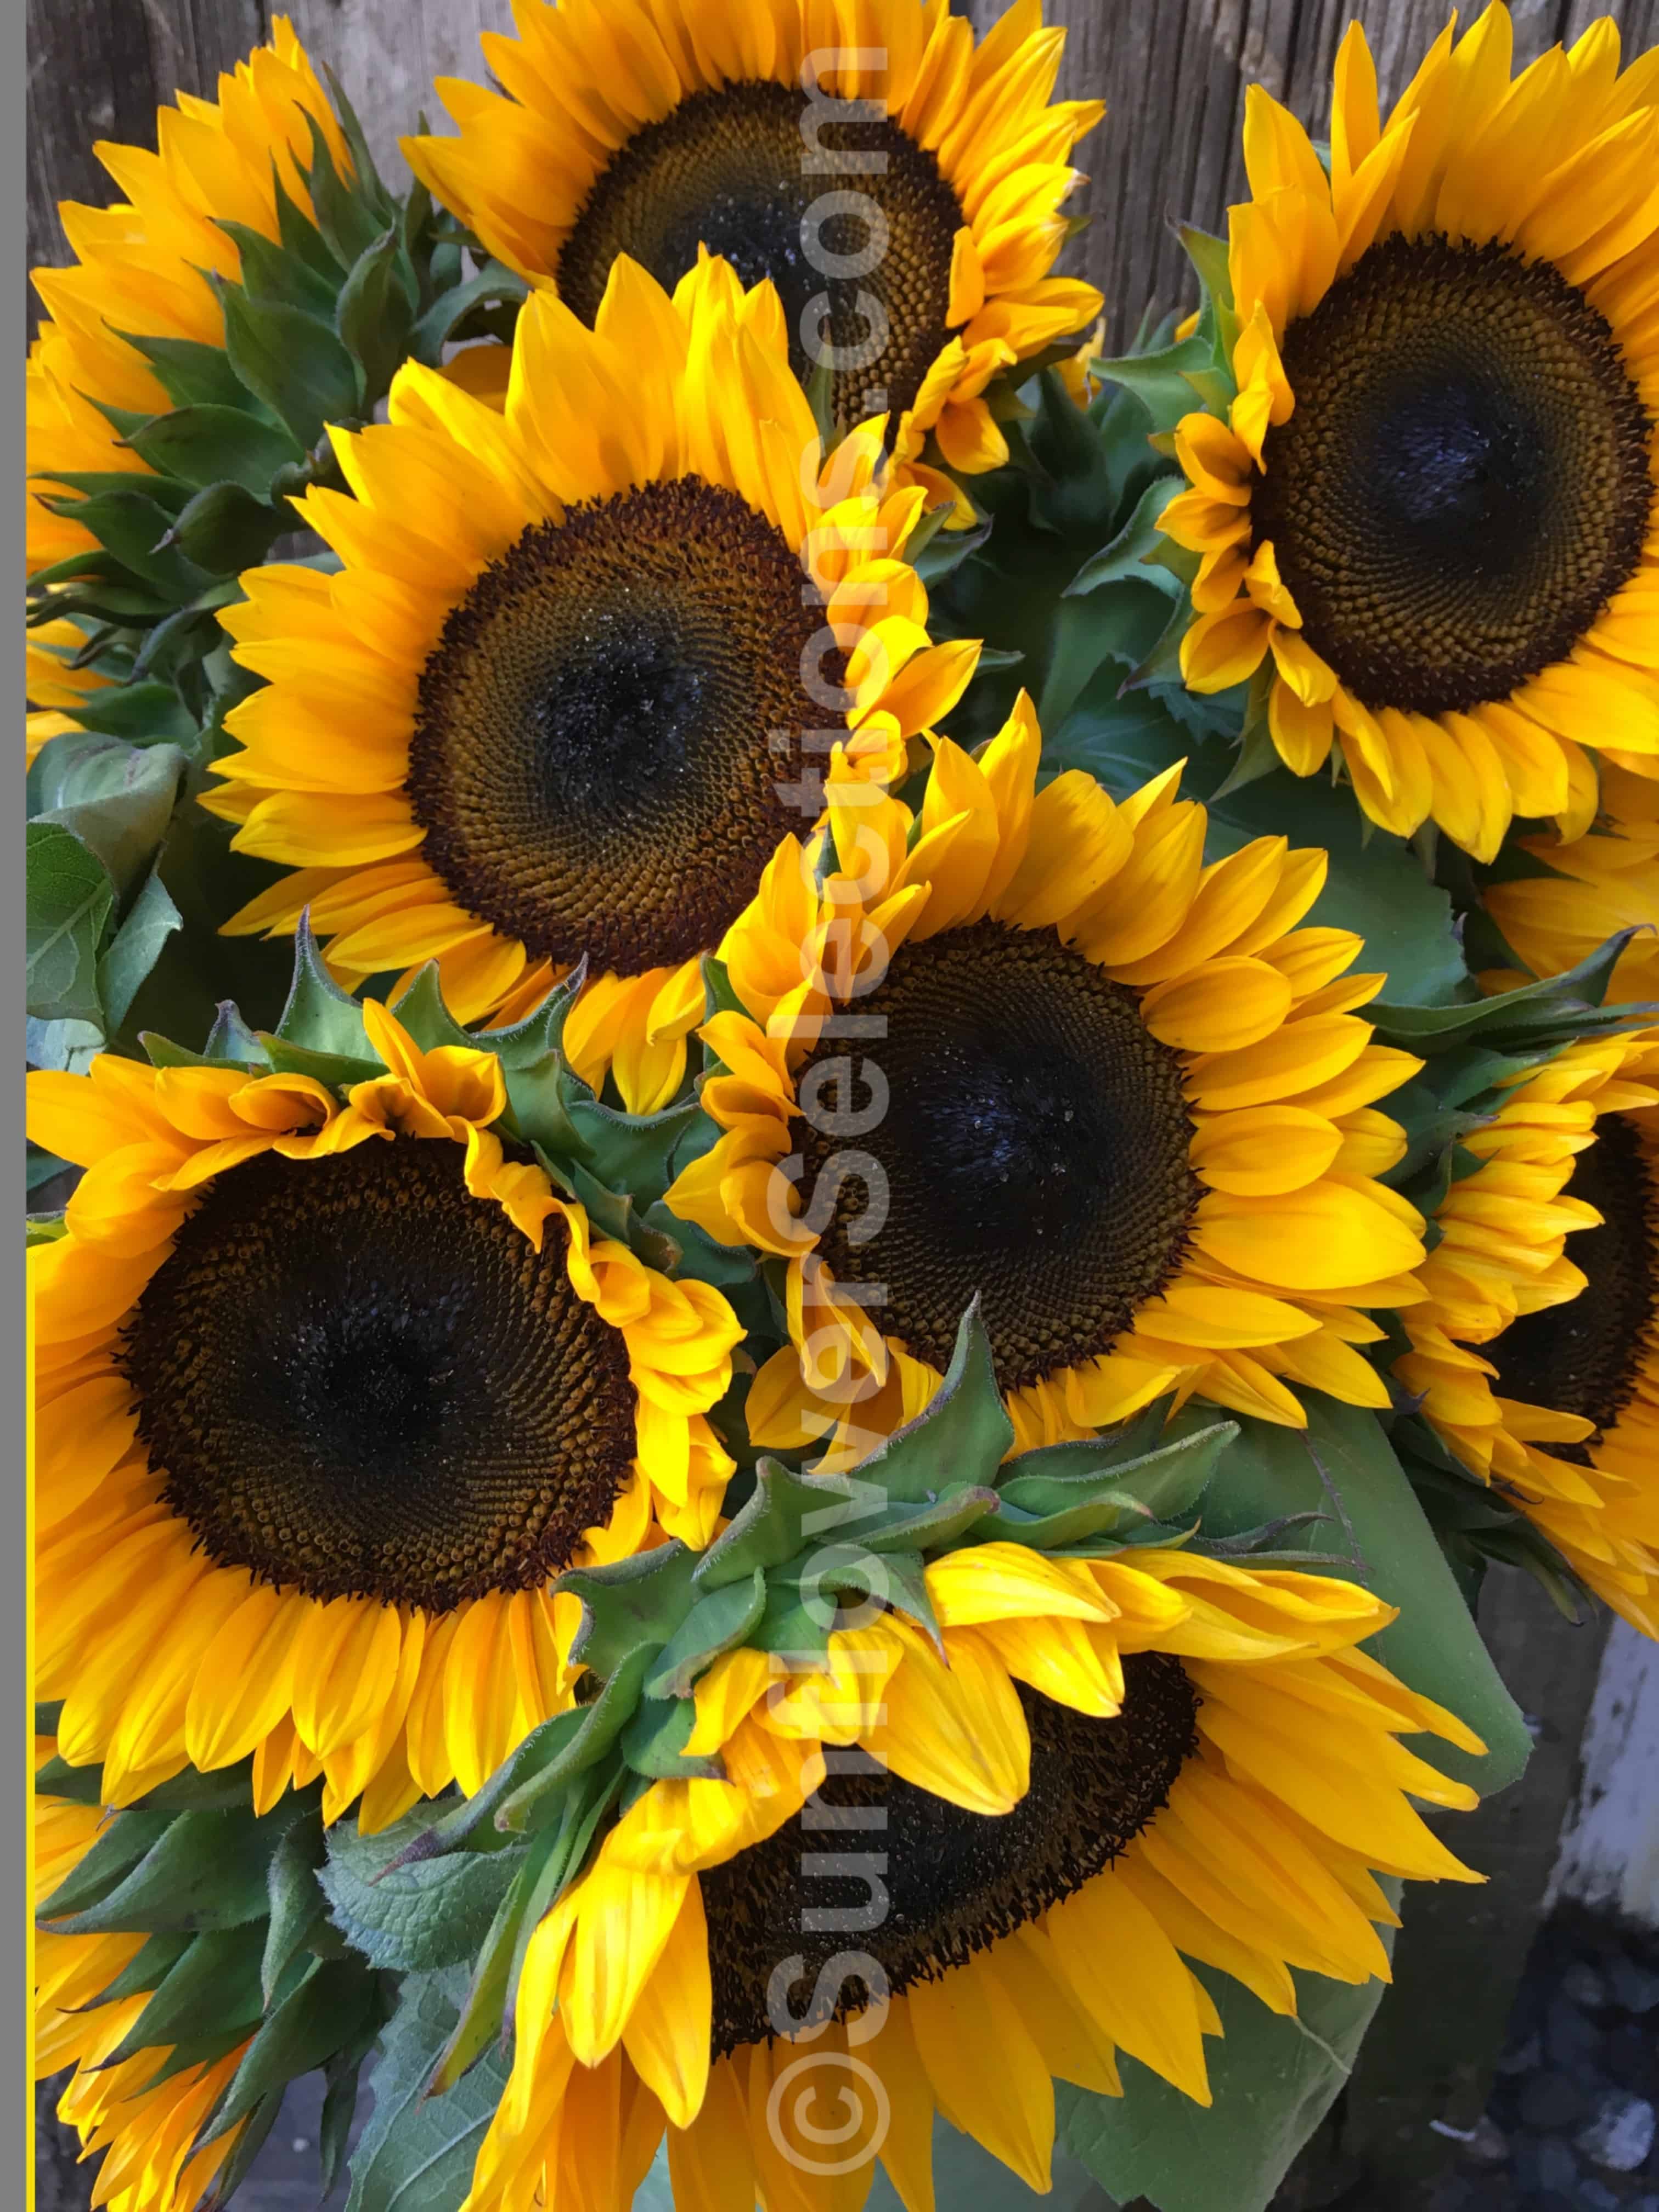 ProCut® Orange Excel - NEW FOR 2018 Sunflowers - SunflowerSelections.com